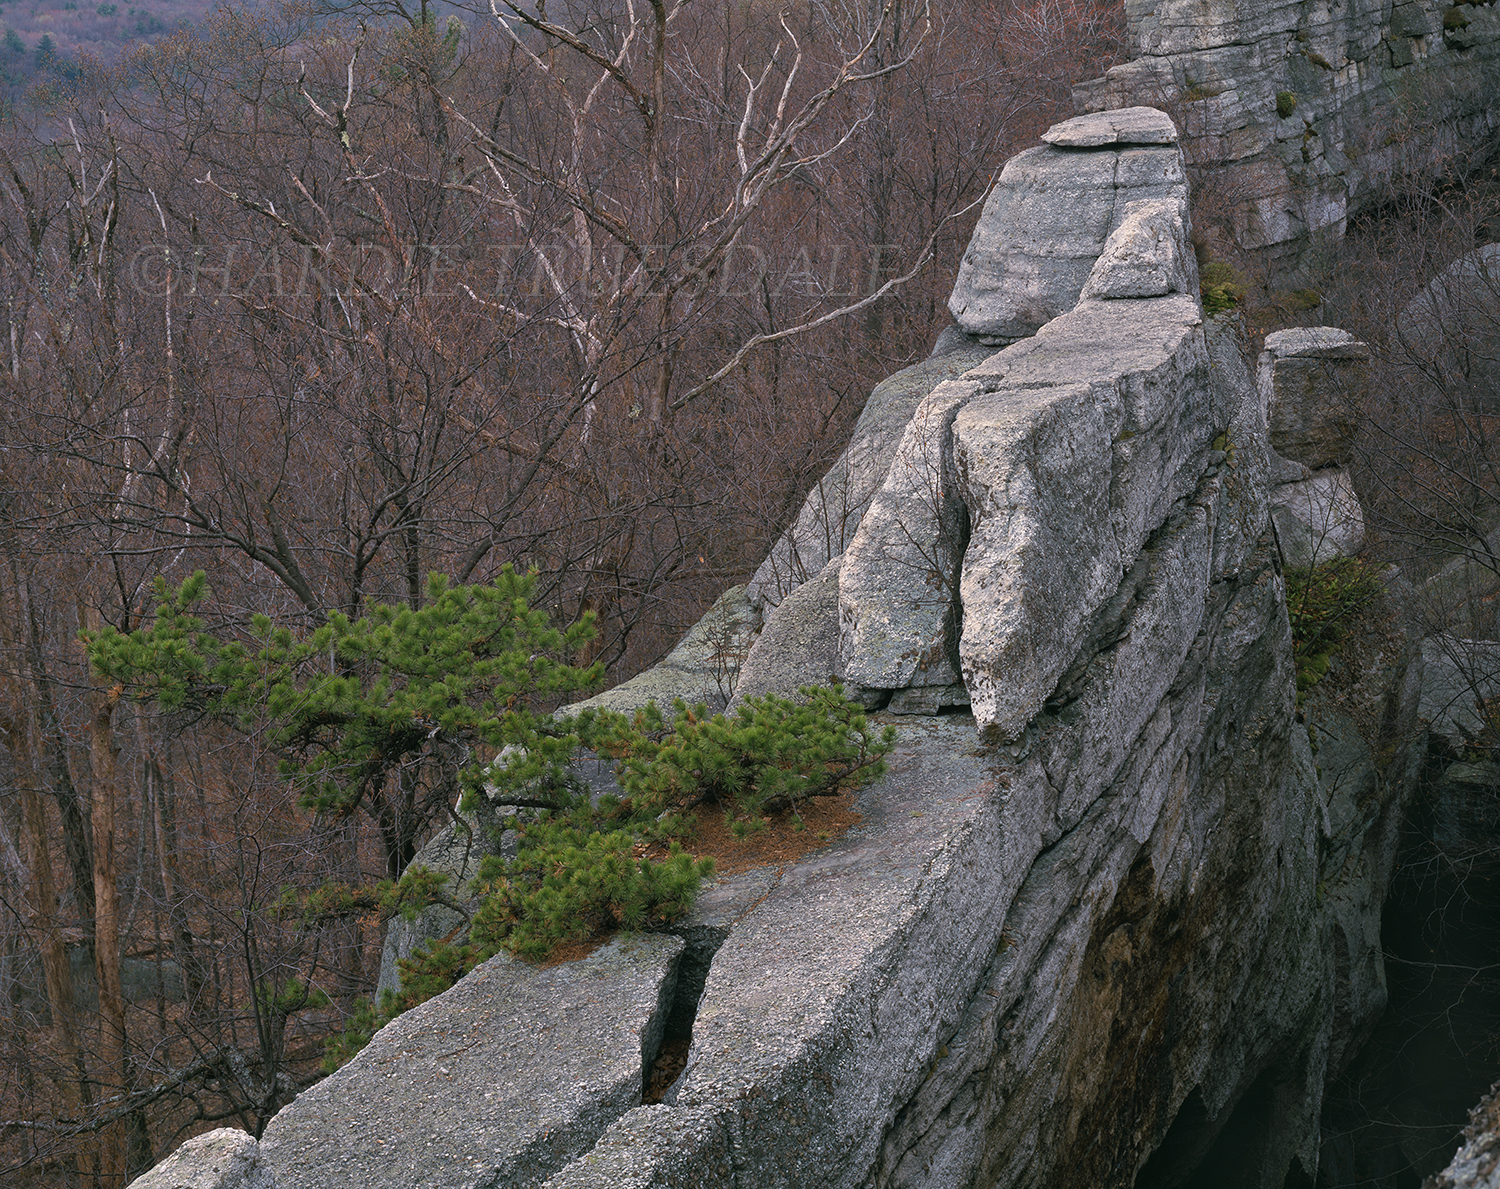  Gks#040 "Lost City, Mohonk Preserve" 